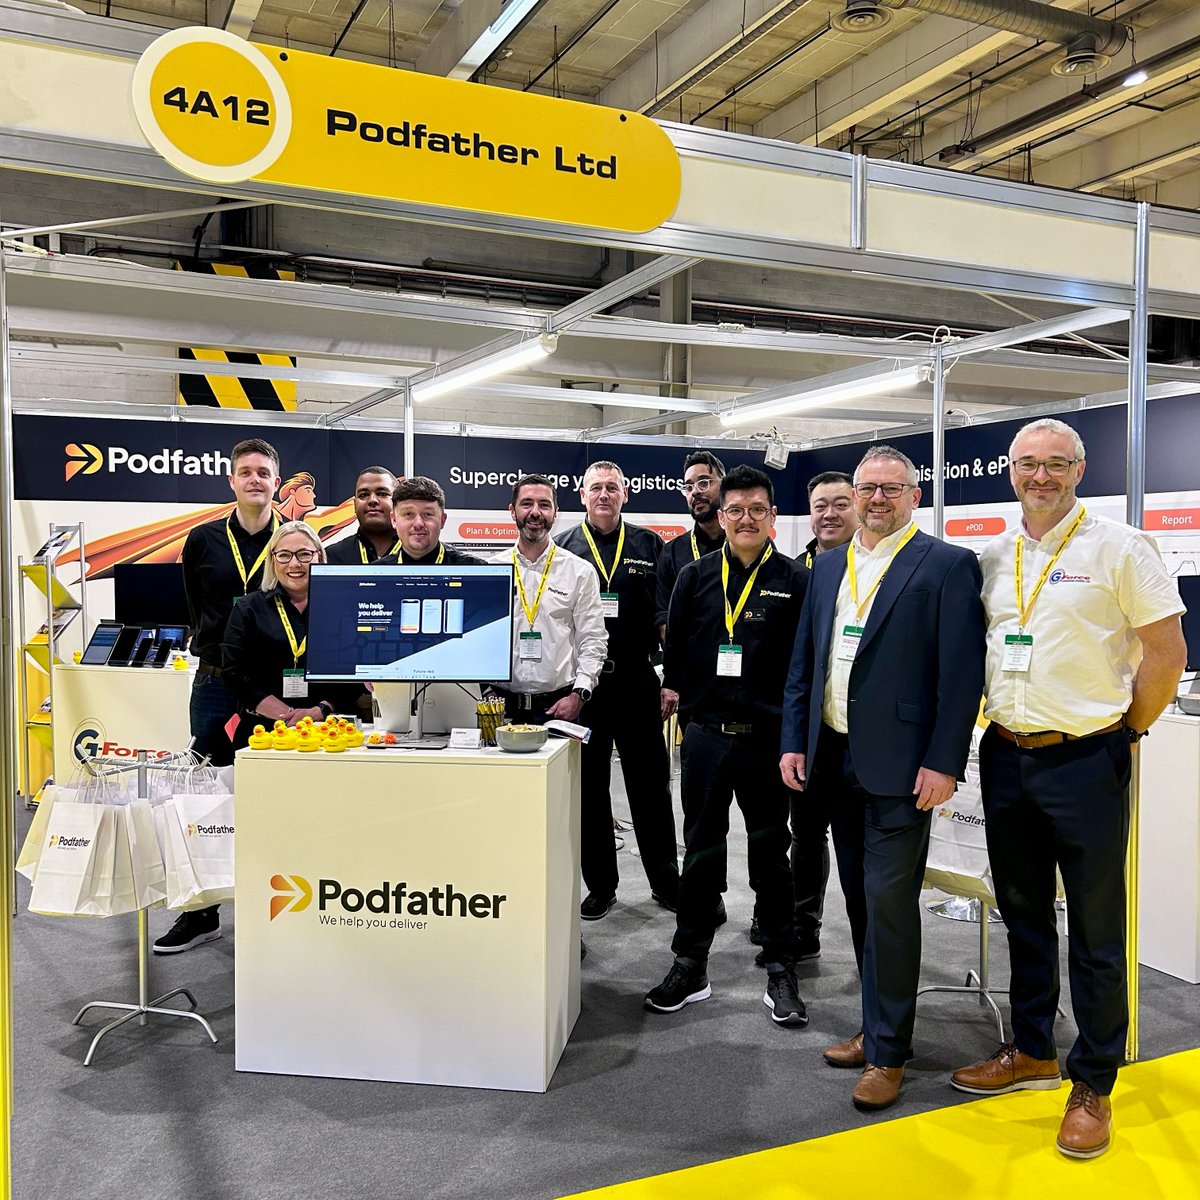 Day one of the @TheCVShow with the team from @G_ForceComms, feel free to drop by the stand and say hello 👋 We're all at stand 4A12! #commercialvehicleshow #cvshow #events #podfather #gforce